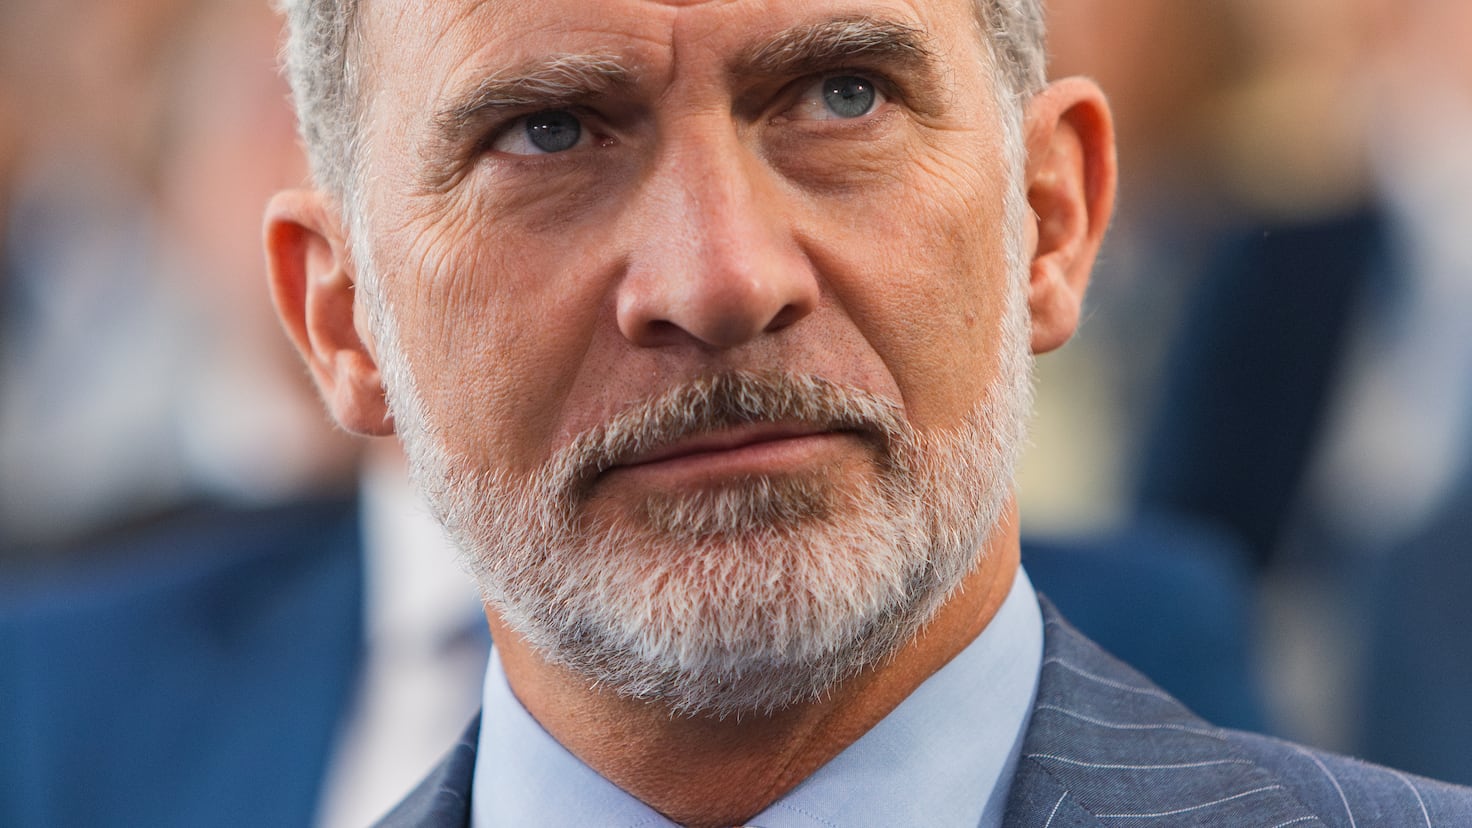 Felipe VI: his most critical situations